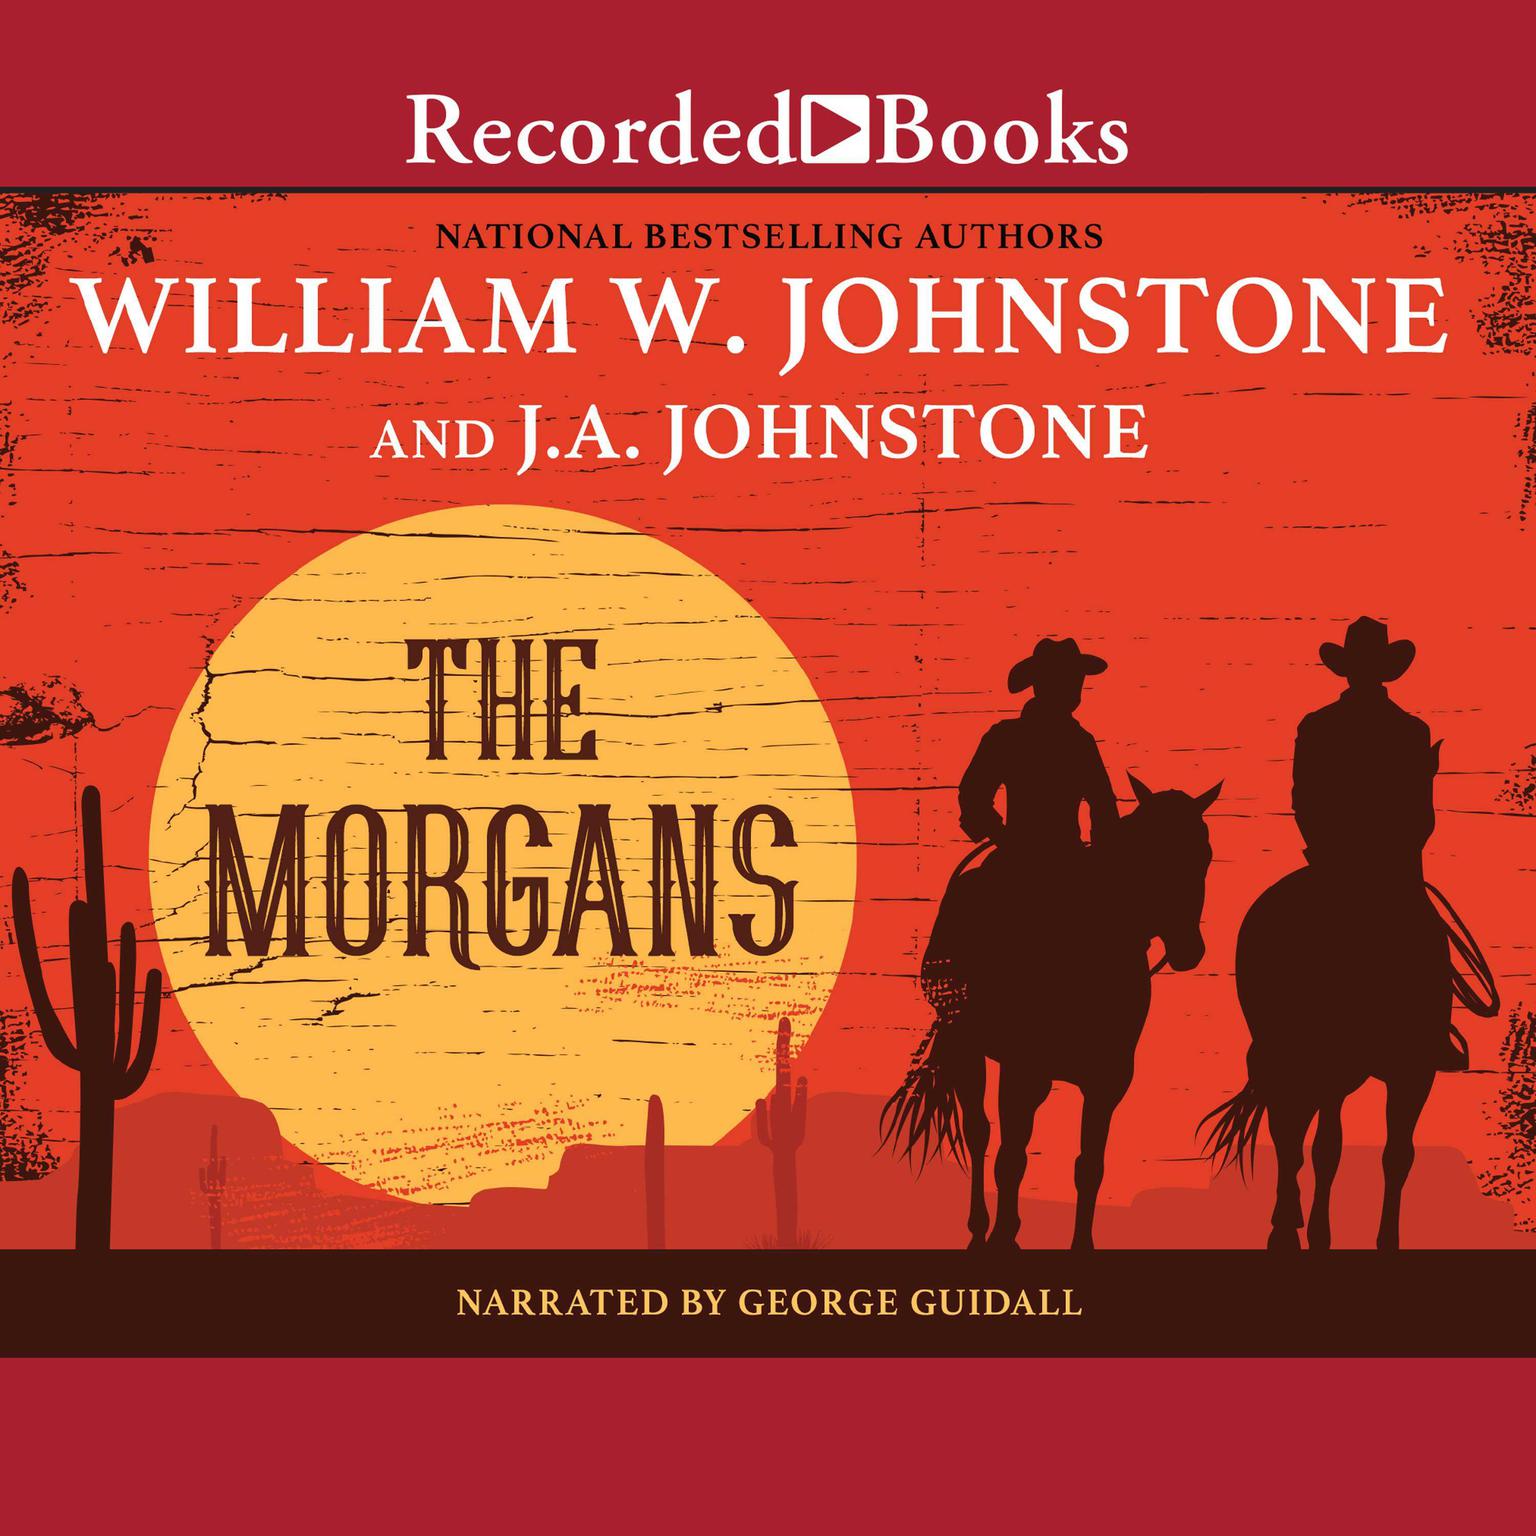 The Morgans Audiobook, by William W. Johnstone